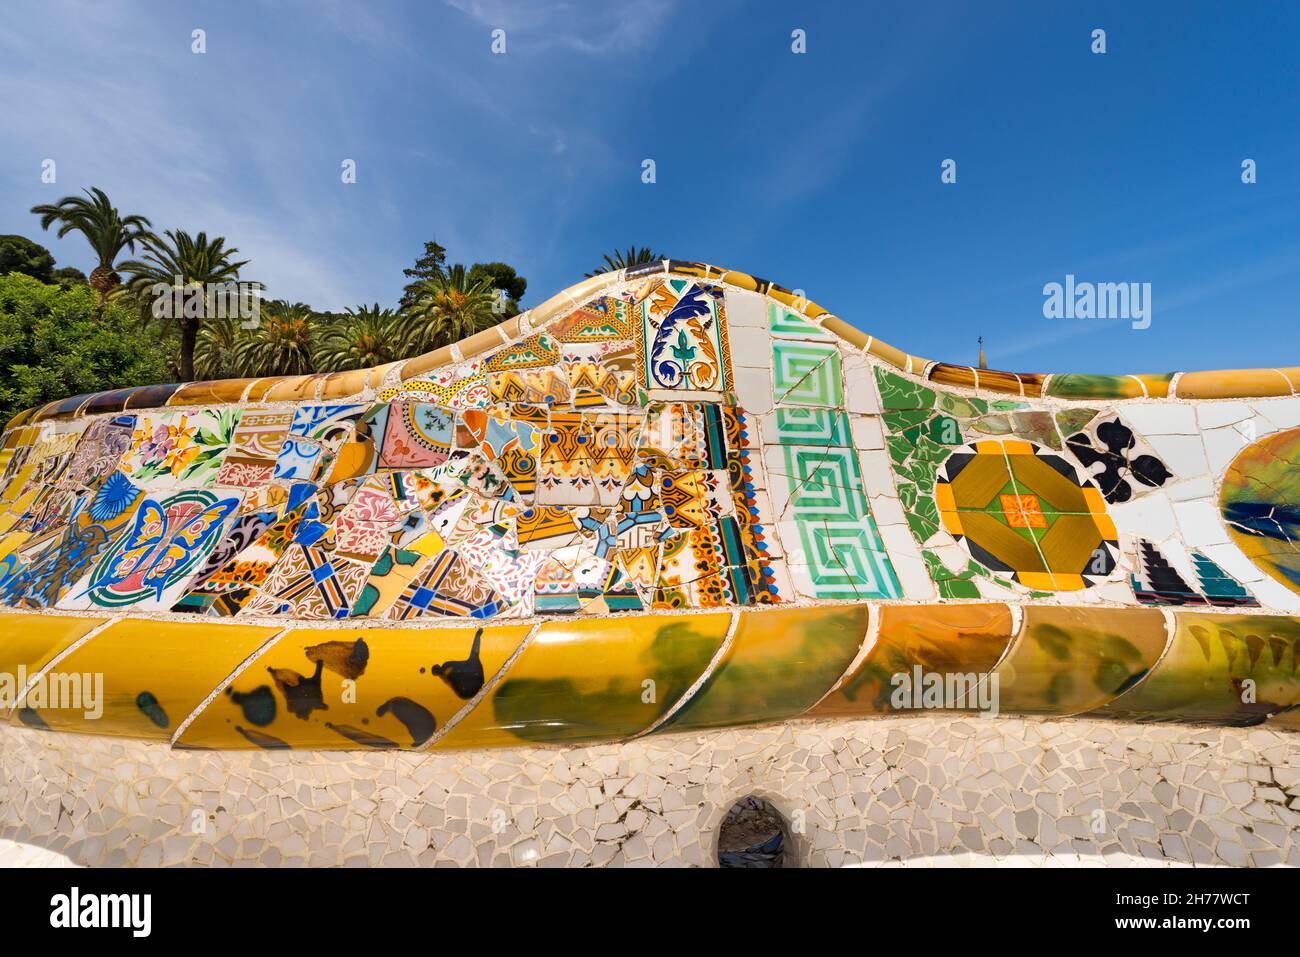 Close-up of a ceramic bench in the Park Guell designed by the famous architect Antoni Gaudí (1852-1926). UNESCO World Heritage Site. Stock Photo